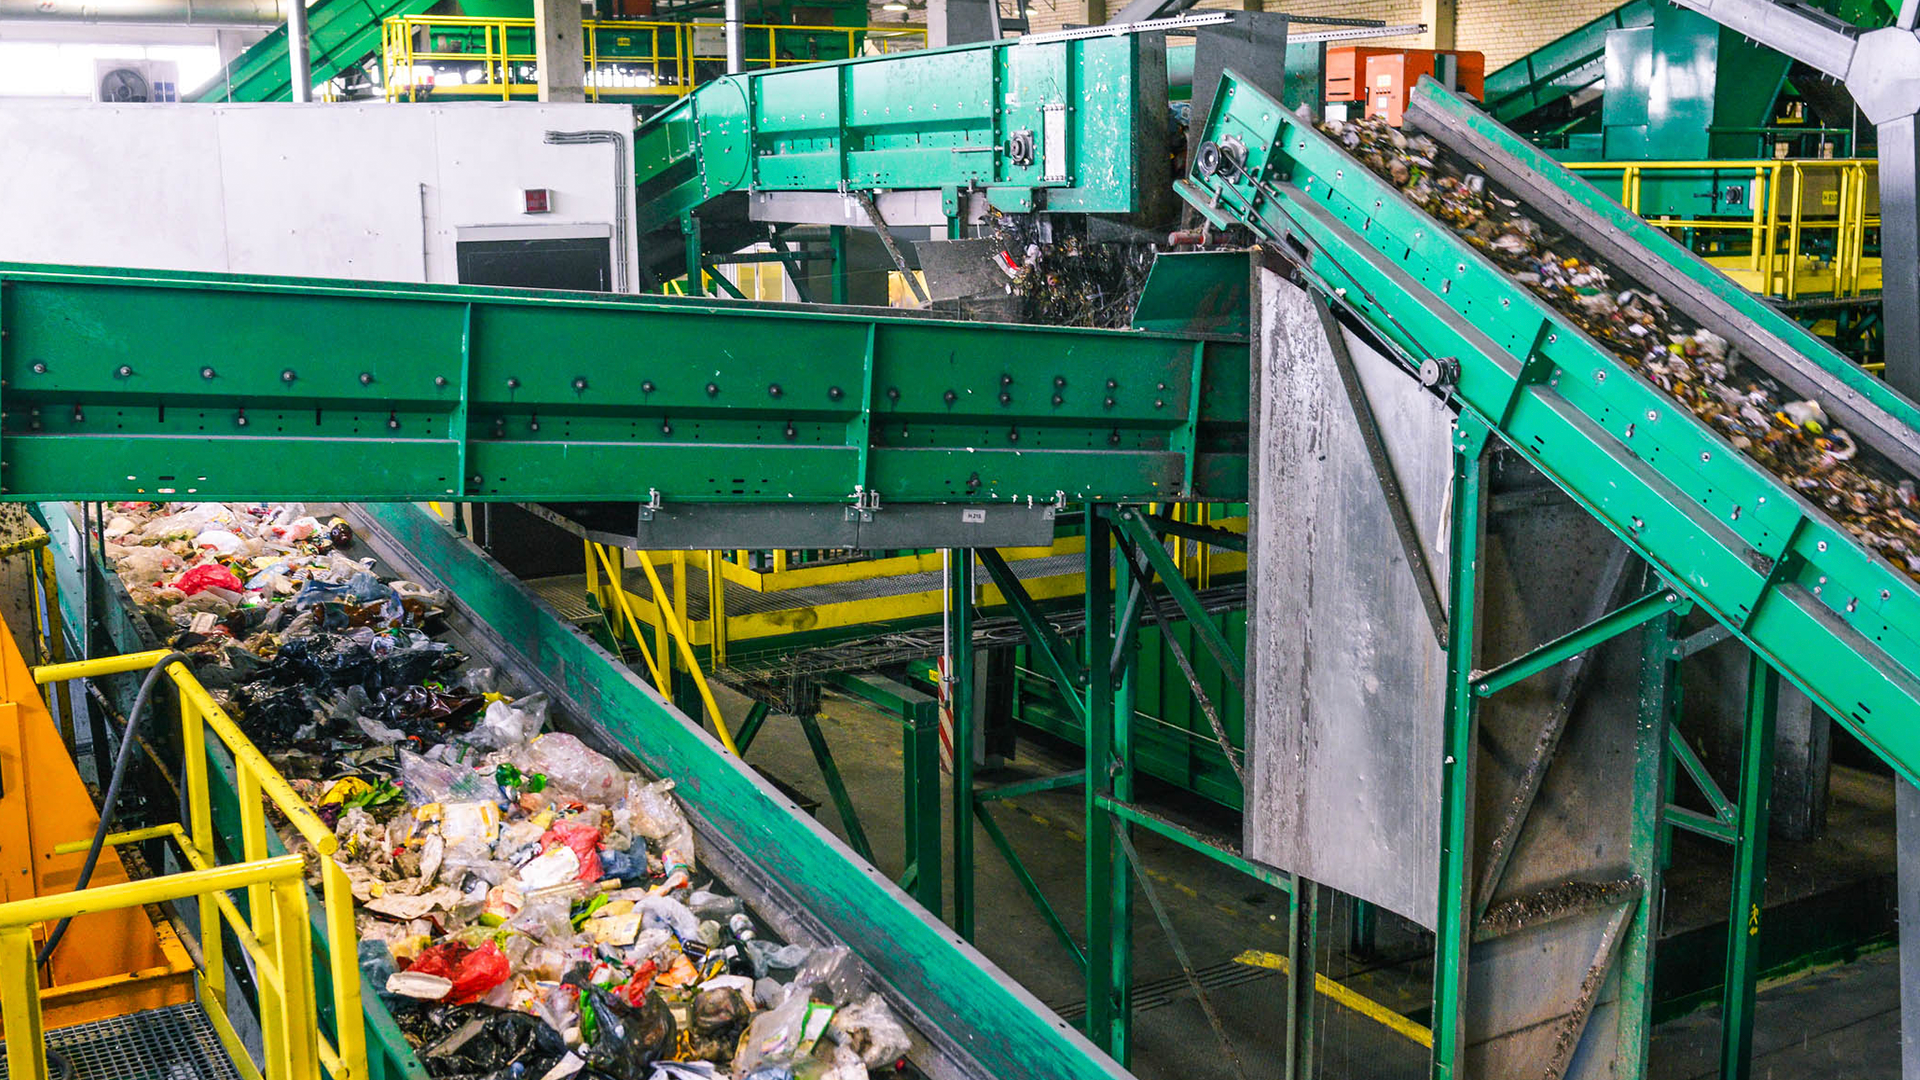 conveyer belt for recycling sorting at a material recycling facility